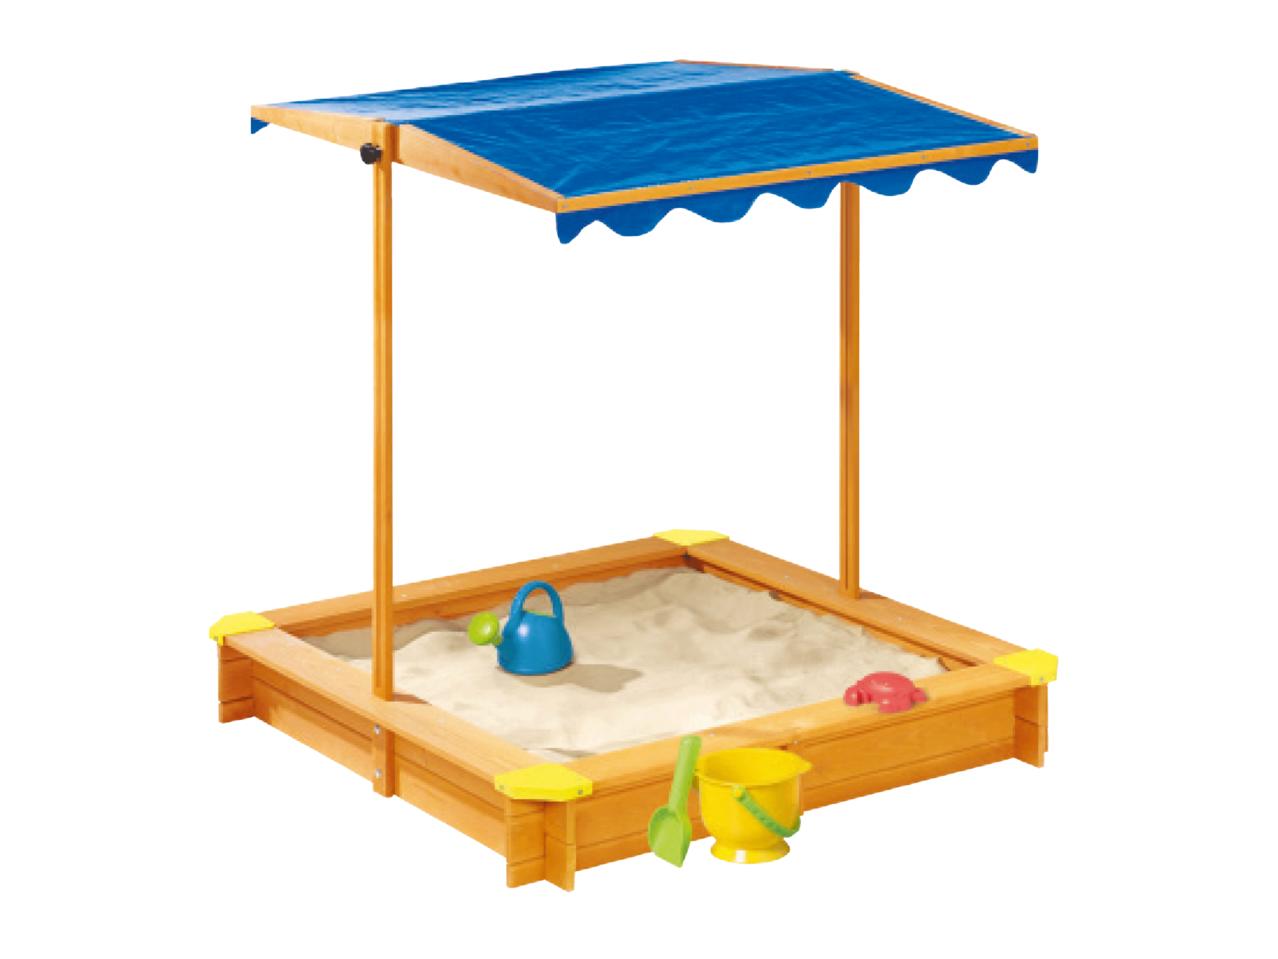 PLAYTIVE JUNIOR Sandpit with Roof